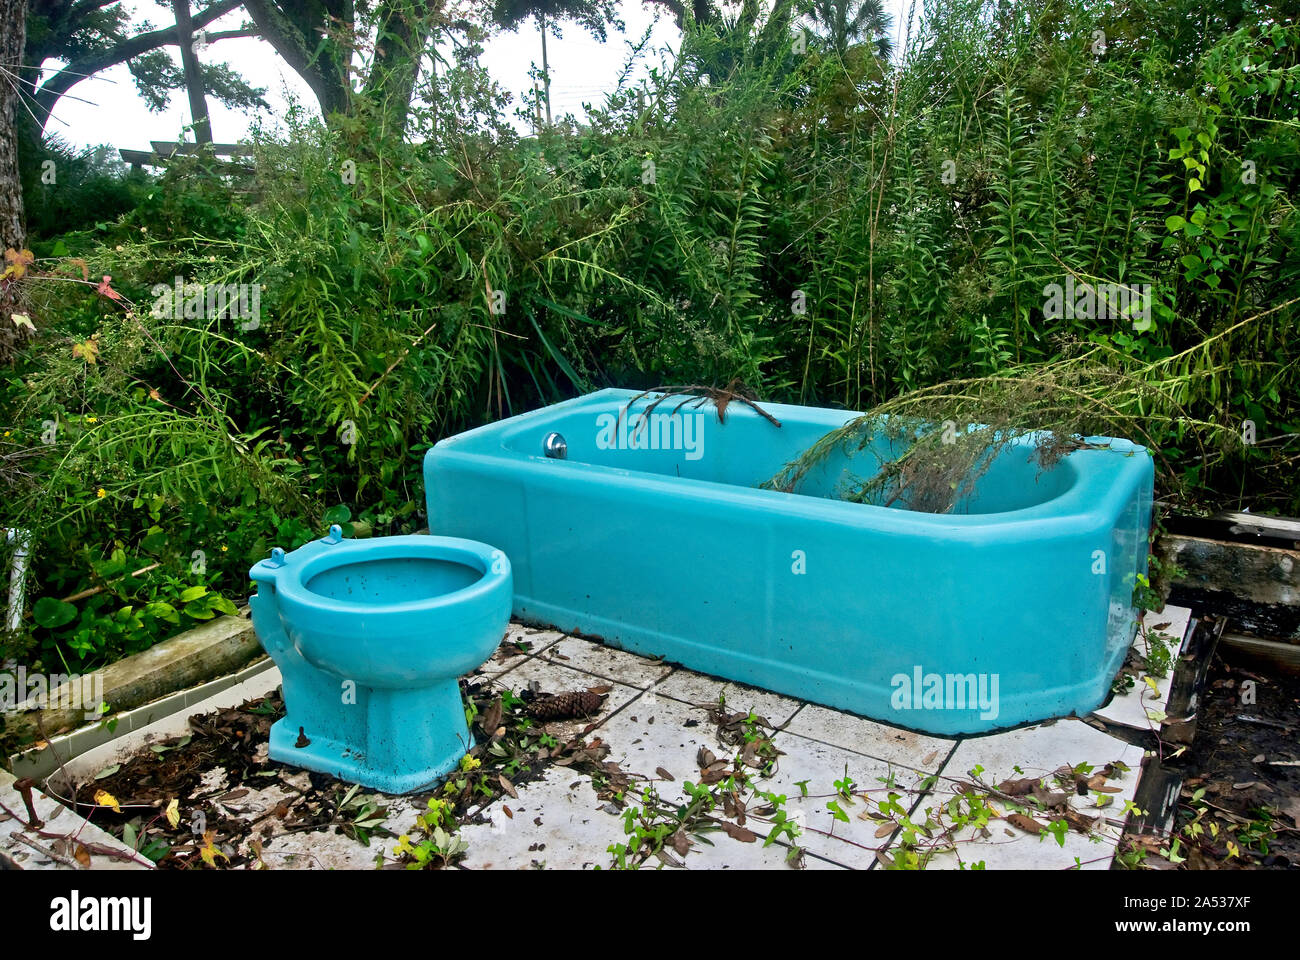 A 1970’s-style turquoise bathtub and toilet are all that remain of a home on Highway 90 in Pass Christian, Mississippi, after Hurricane Katrina. Stock Photo